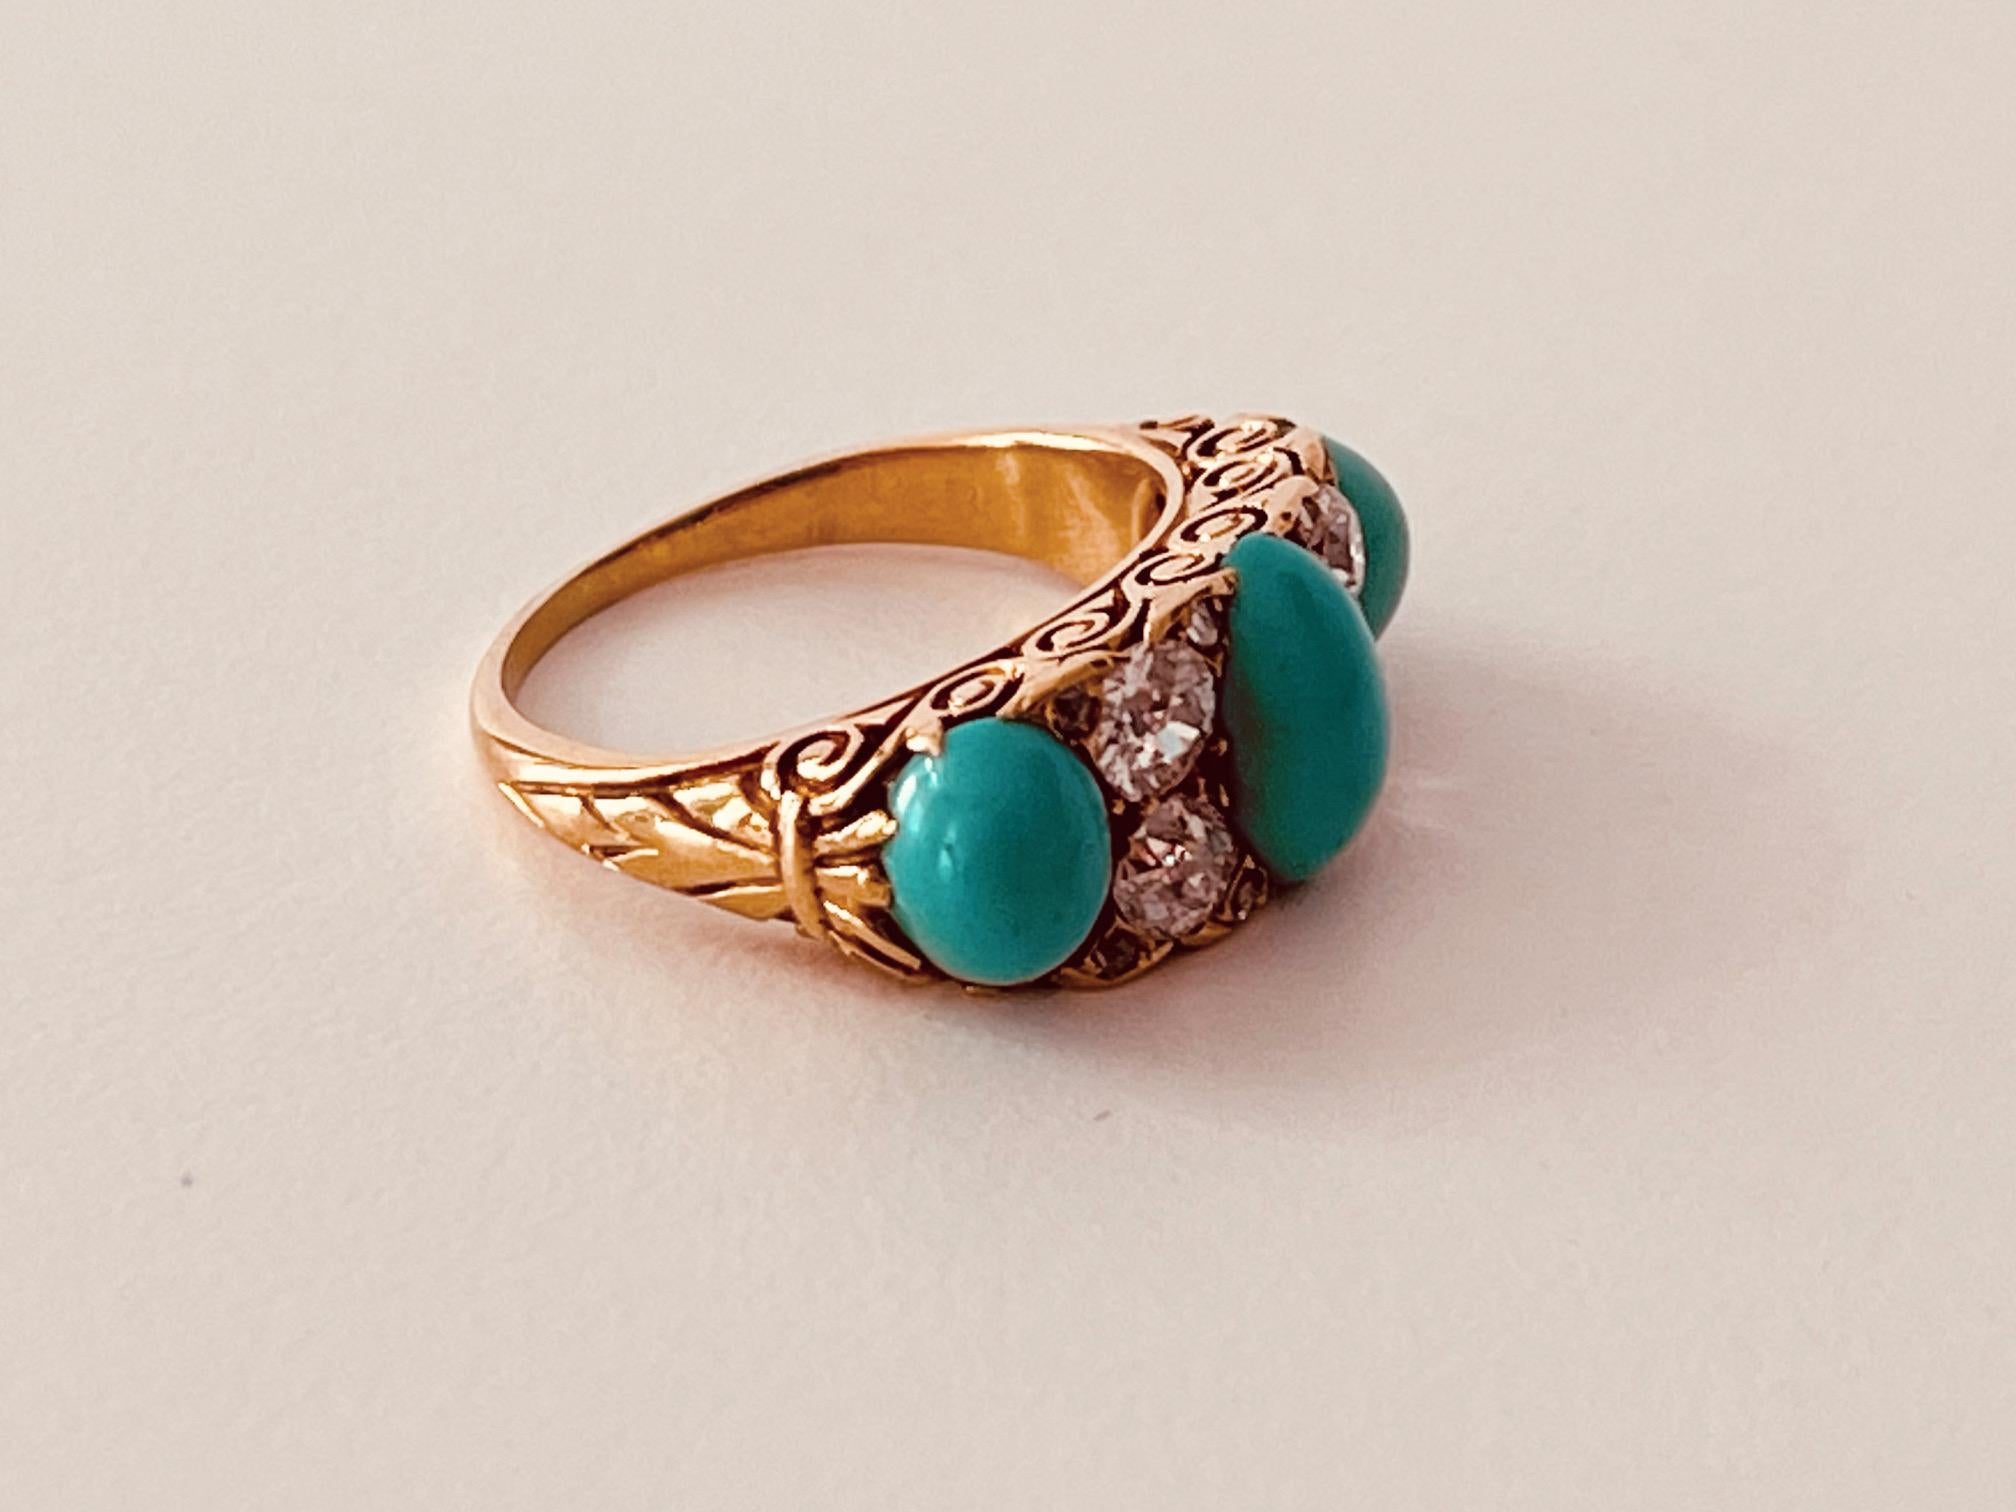 Victorian turquoise and diamond 7-stone ring. The 3 cabochon turquoises interspersed with 4 old cut diamonds and with tiny rose-diamond spacers. Unmarked but tests as 18ct yellow gold. 7.2 grams. Ring is resizable. Size: N (UK), 54 (EU), 7 (US),